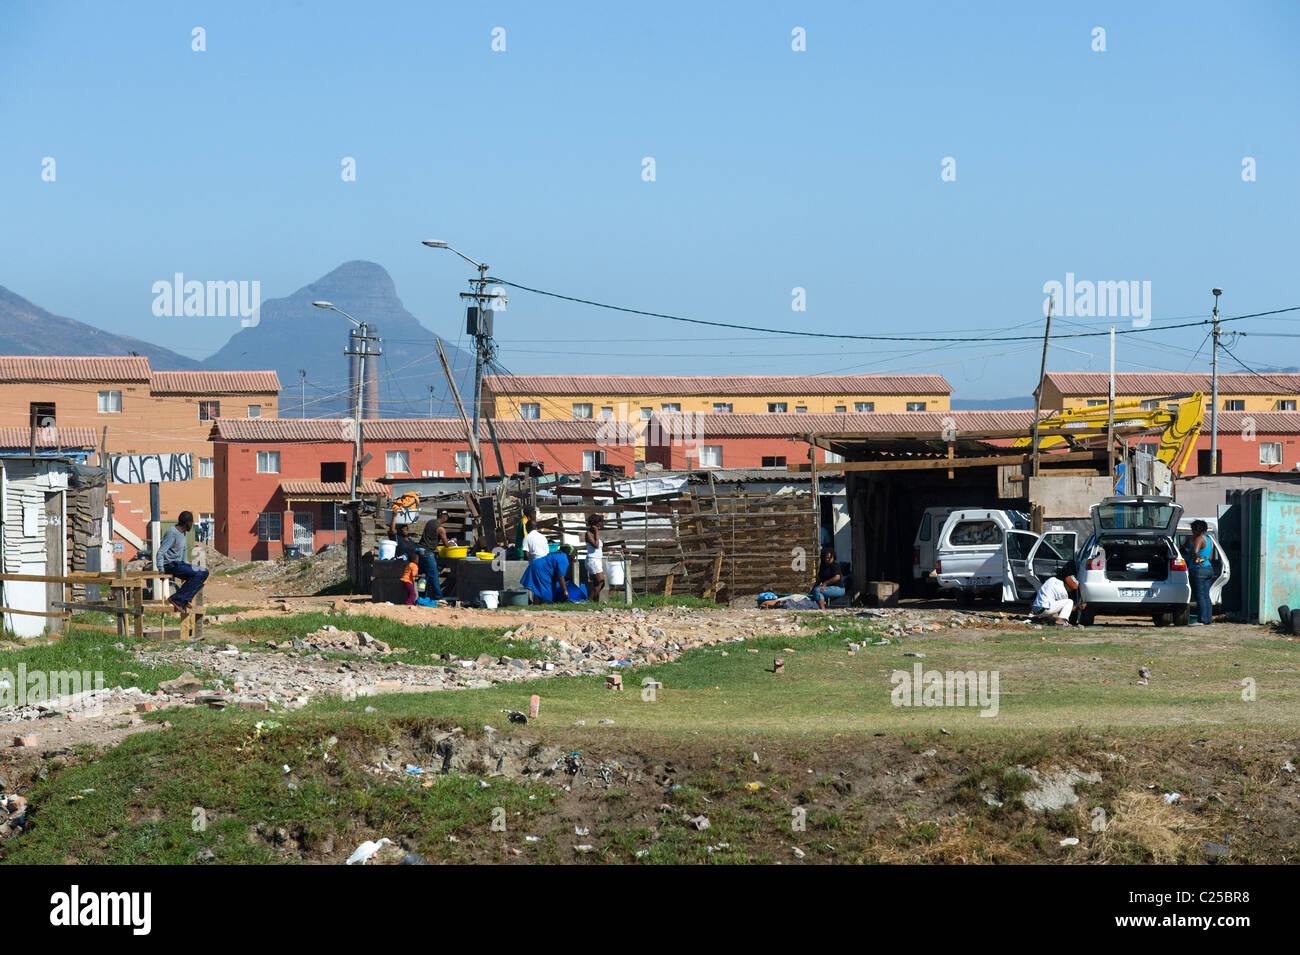 Shacks and new housing along Vanguard Drive, Epping, Cape Town, South Africa Stock Photo